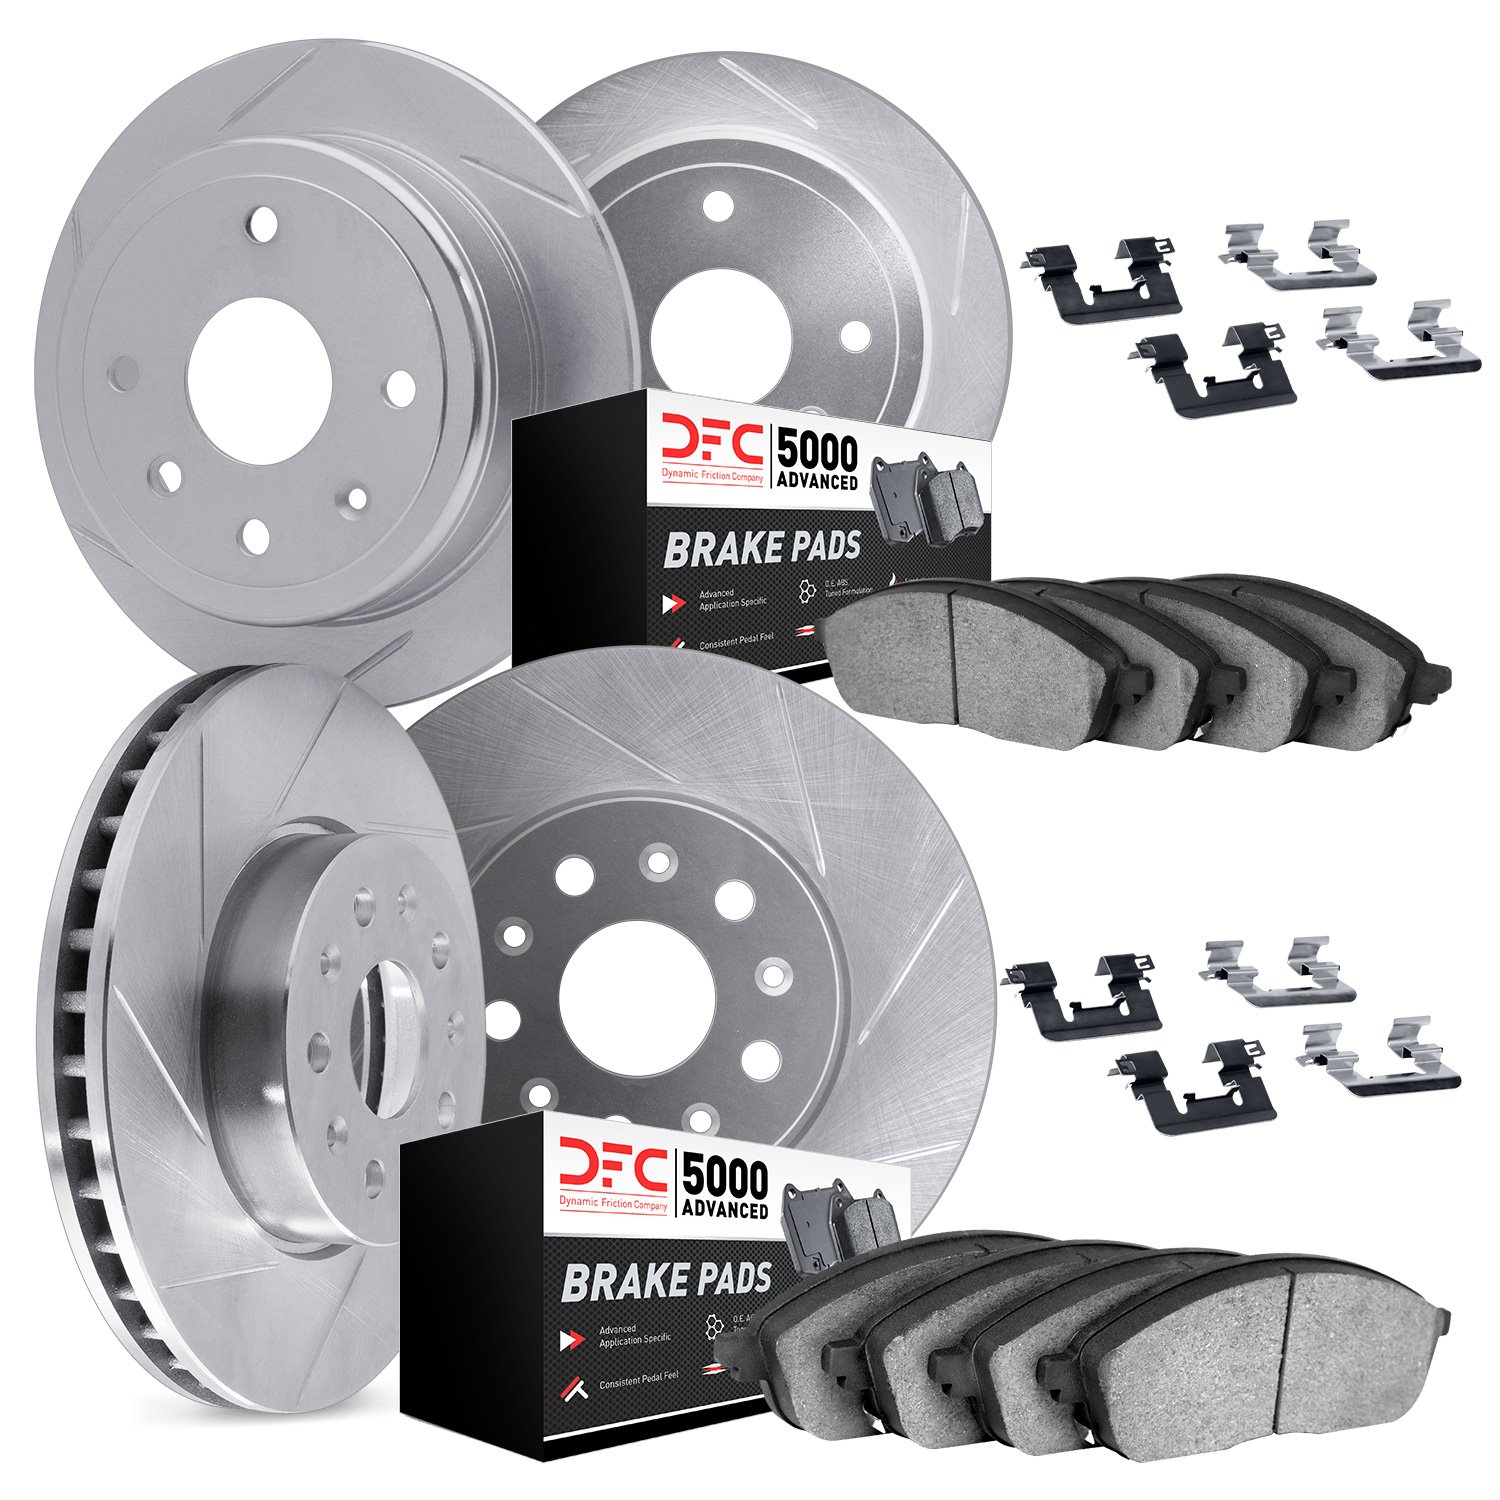 5514-42005 Slotted Brake Rotors w/5000 Advanced Brake Pads Kit & Hardware [Silver], 2003-2007 Mopar, Position: Front and Rear